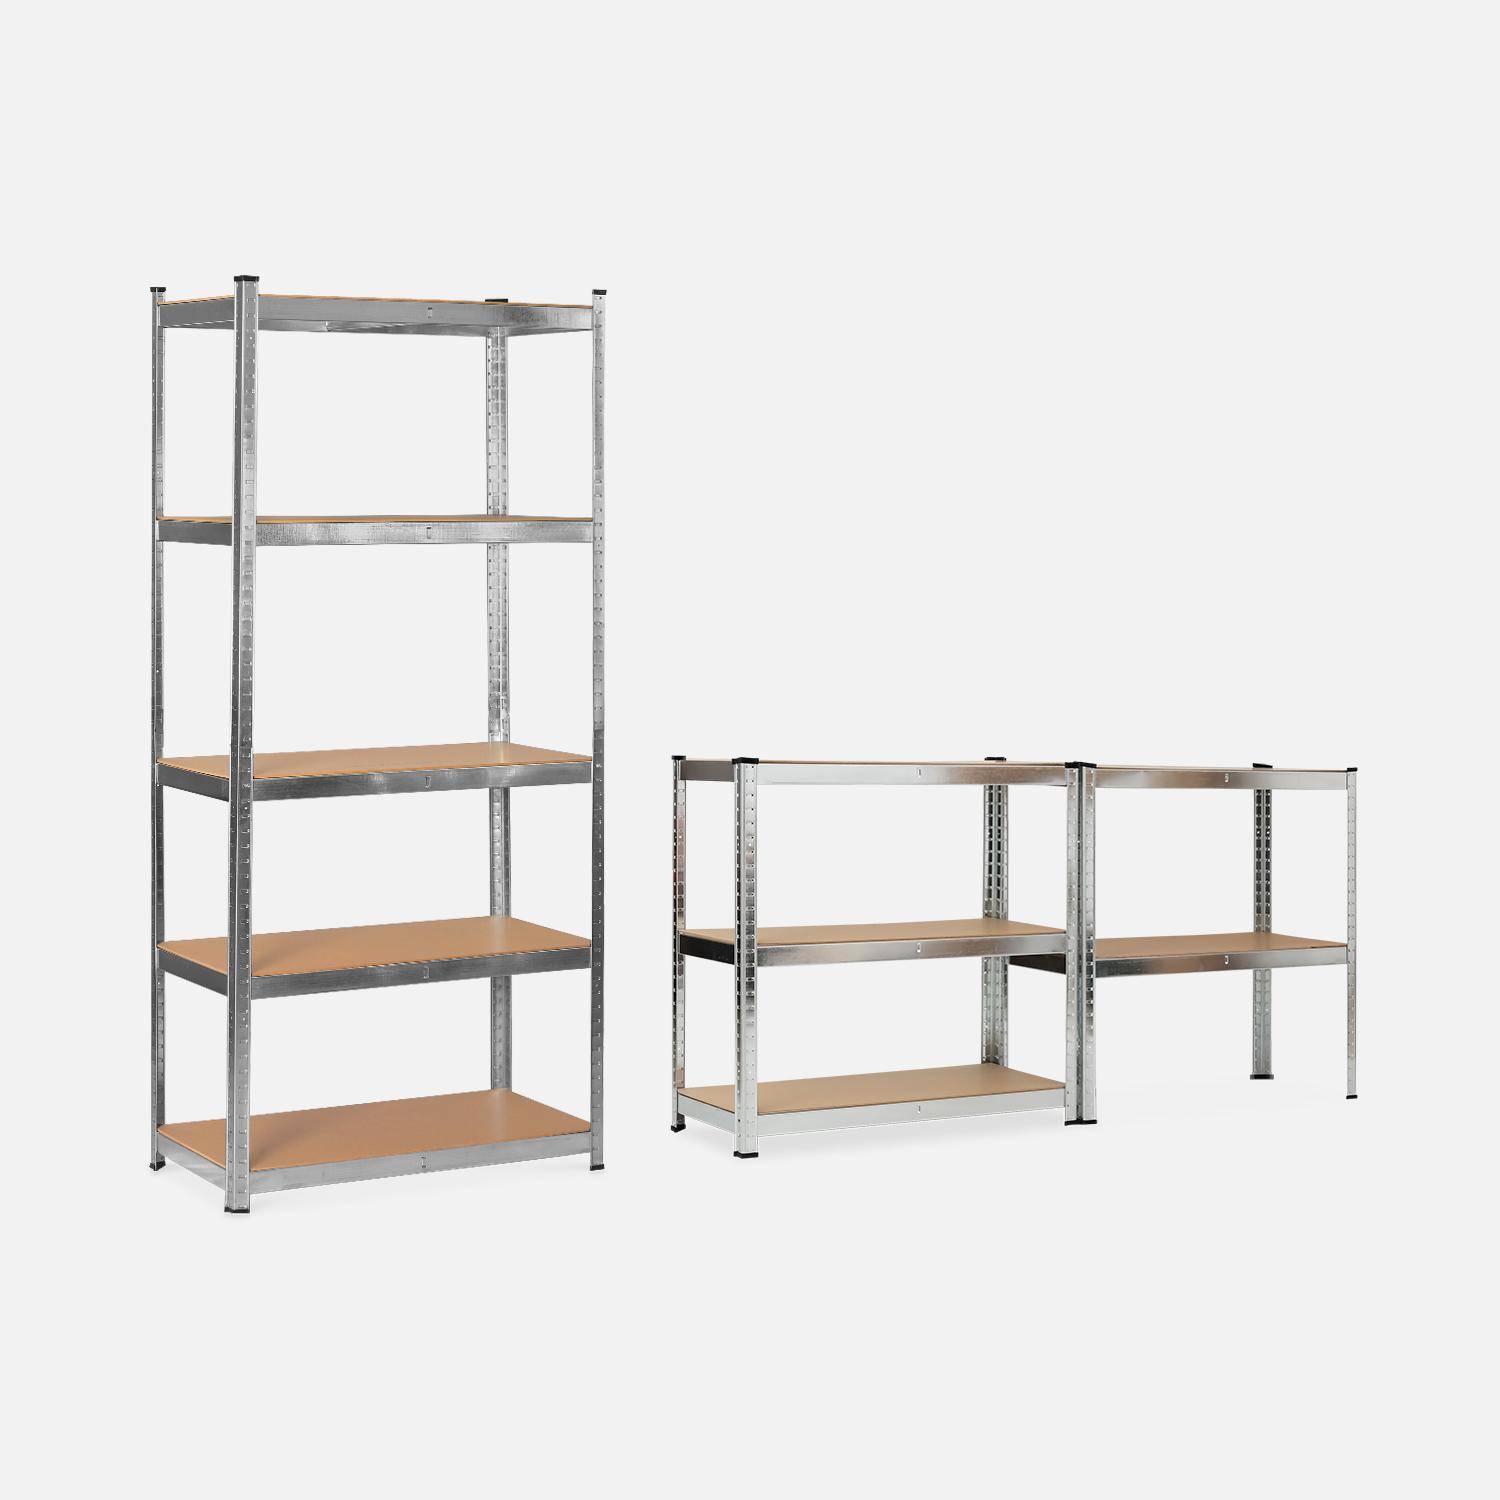 Set of 2 modular metal shelves for heavy loads - Modul - with 5 trays Photo2